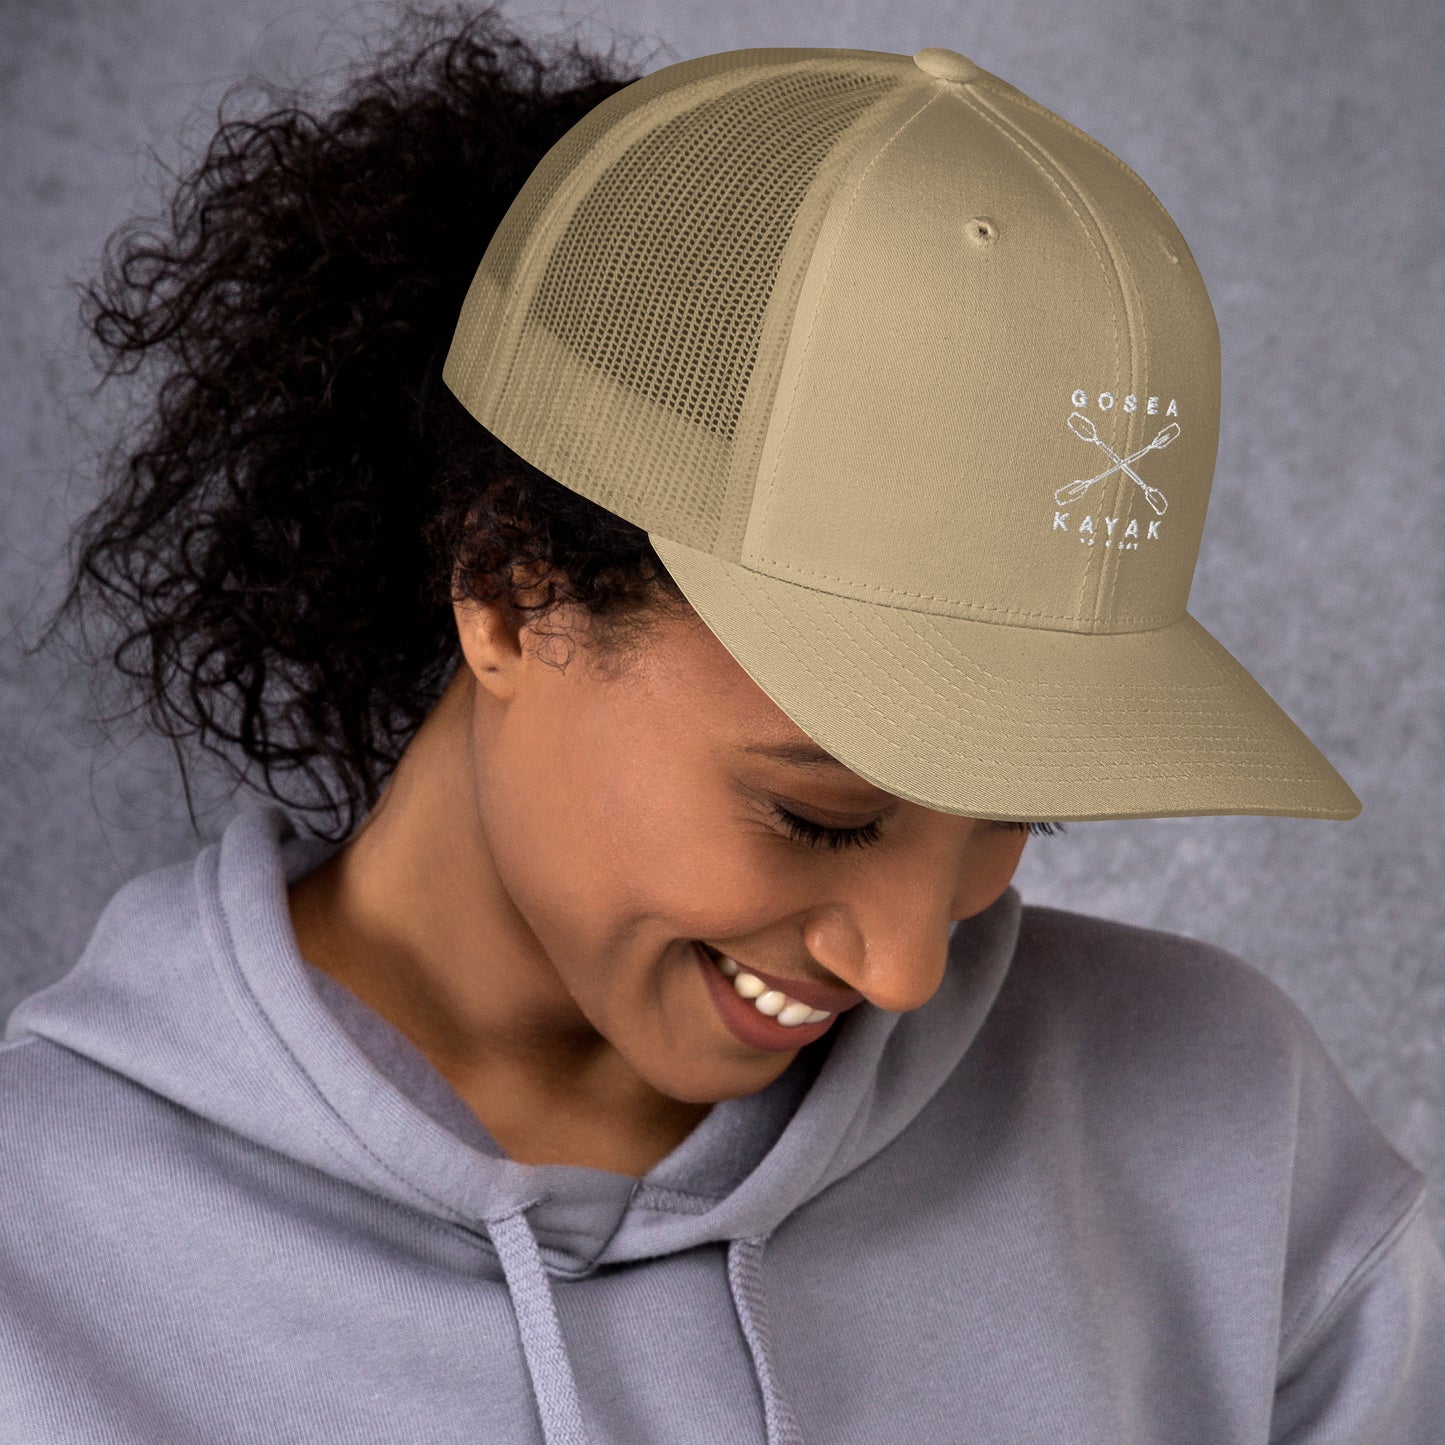  Trucker Cap - Khaki - side view - being warn by woman with her head down - Crossed Paddles Go Sea Kayak Crew logo in white on front - Genuine Byron Bay Merchandise | Produced by Go Sea Kayak Byron Bay 